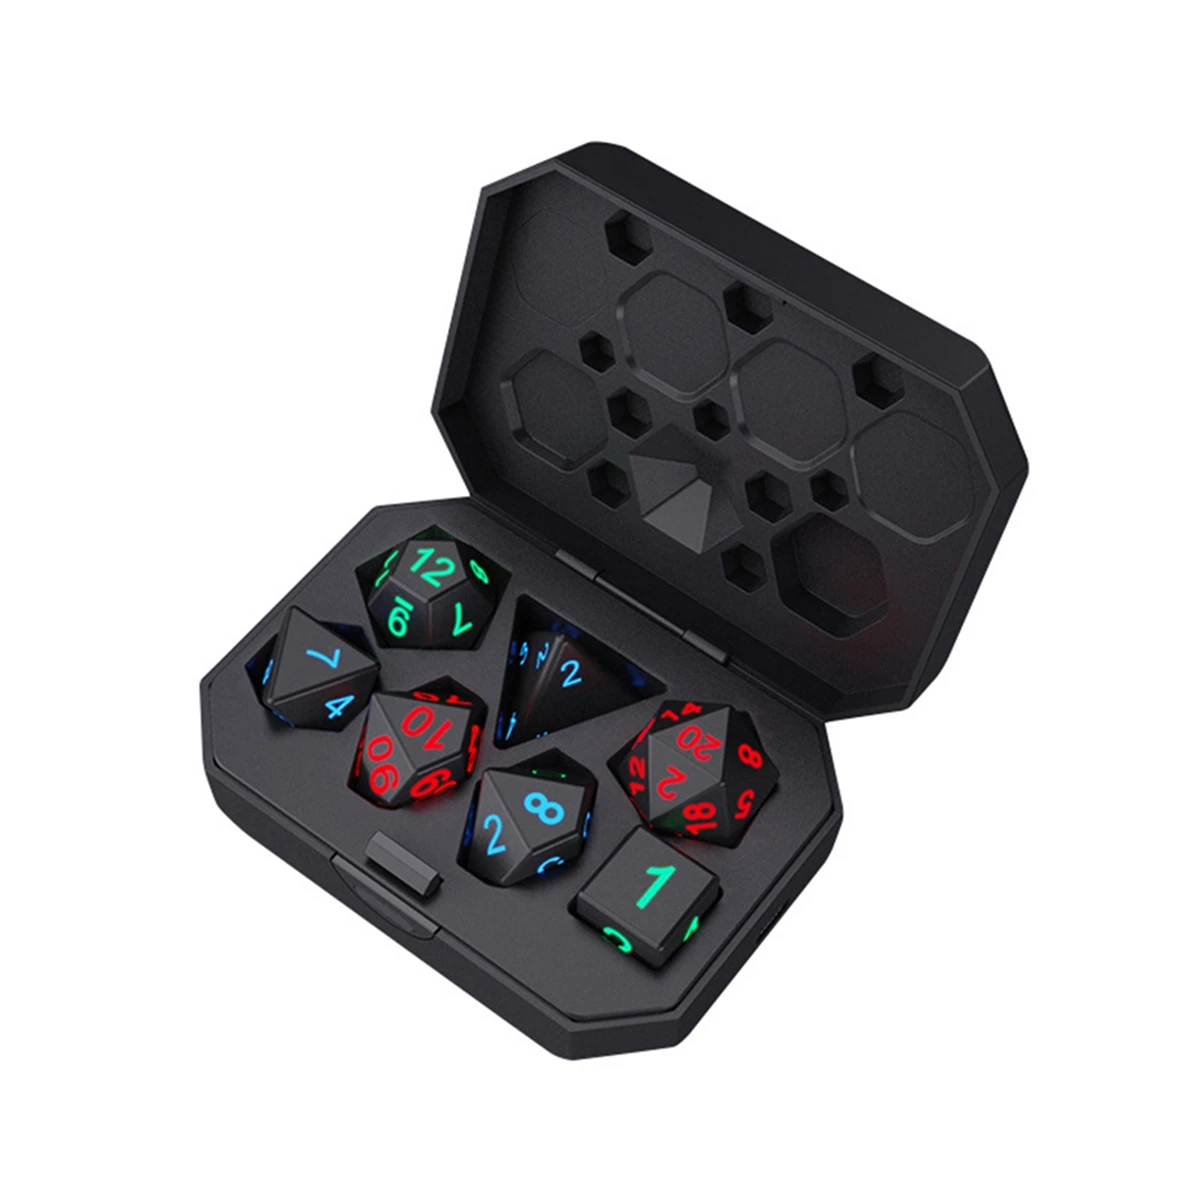 

7Pcs Electronic Dice USB Rechargeable Luminous Dice Glow in the Dark DND Dices RPG Polyhedral Dice D4 D6 D8 D10 D12 D20